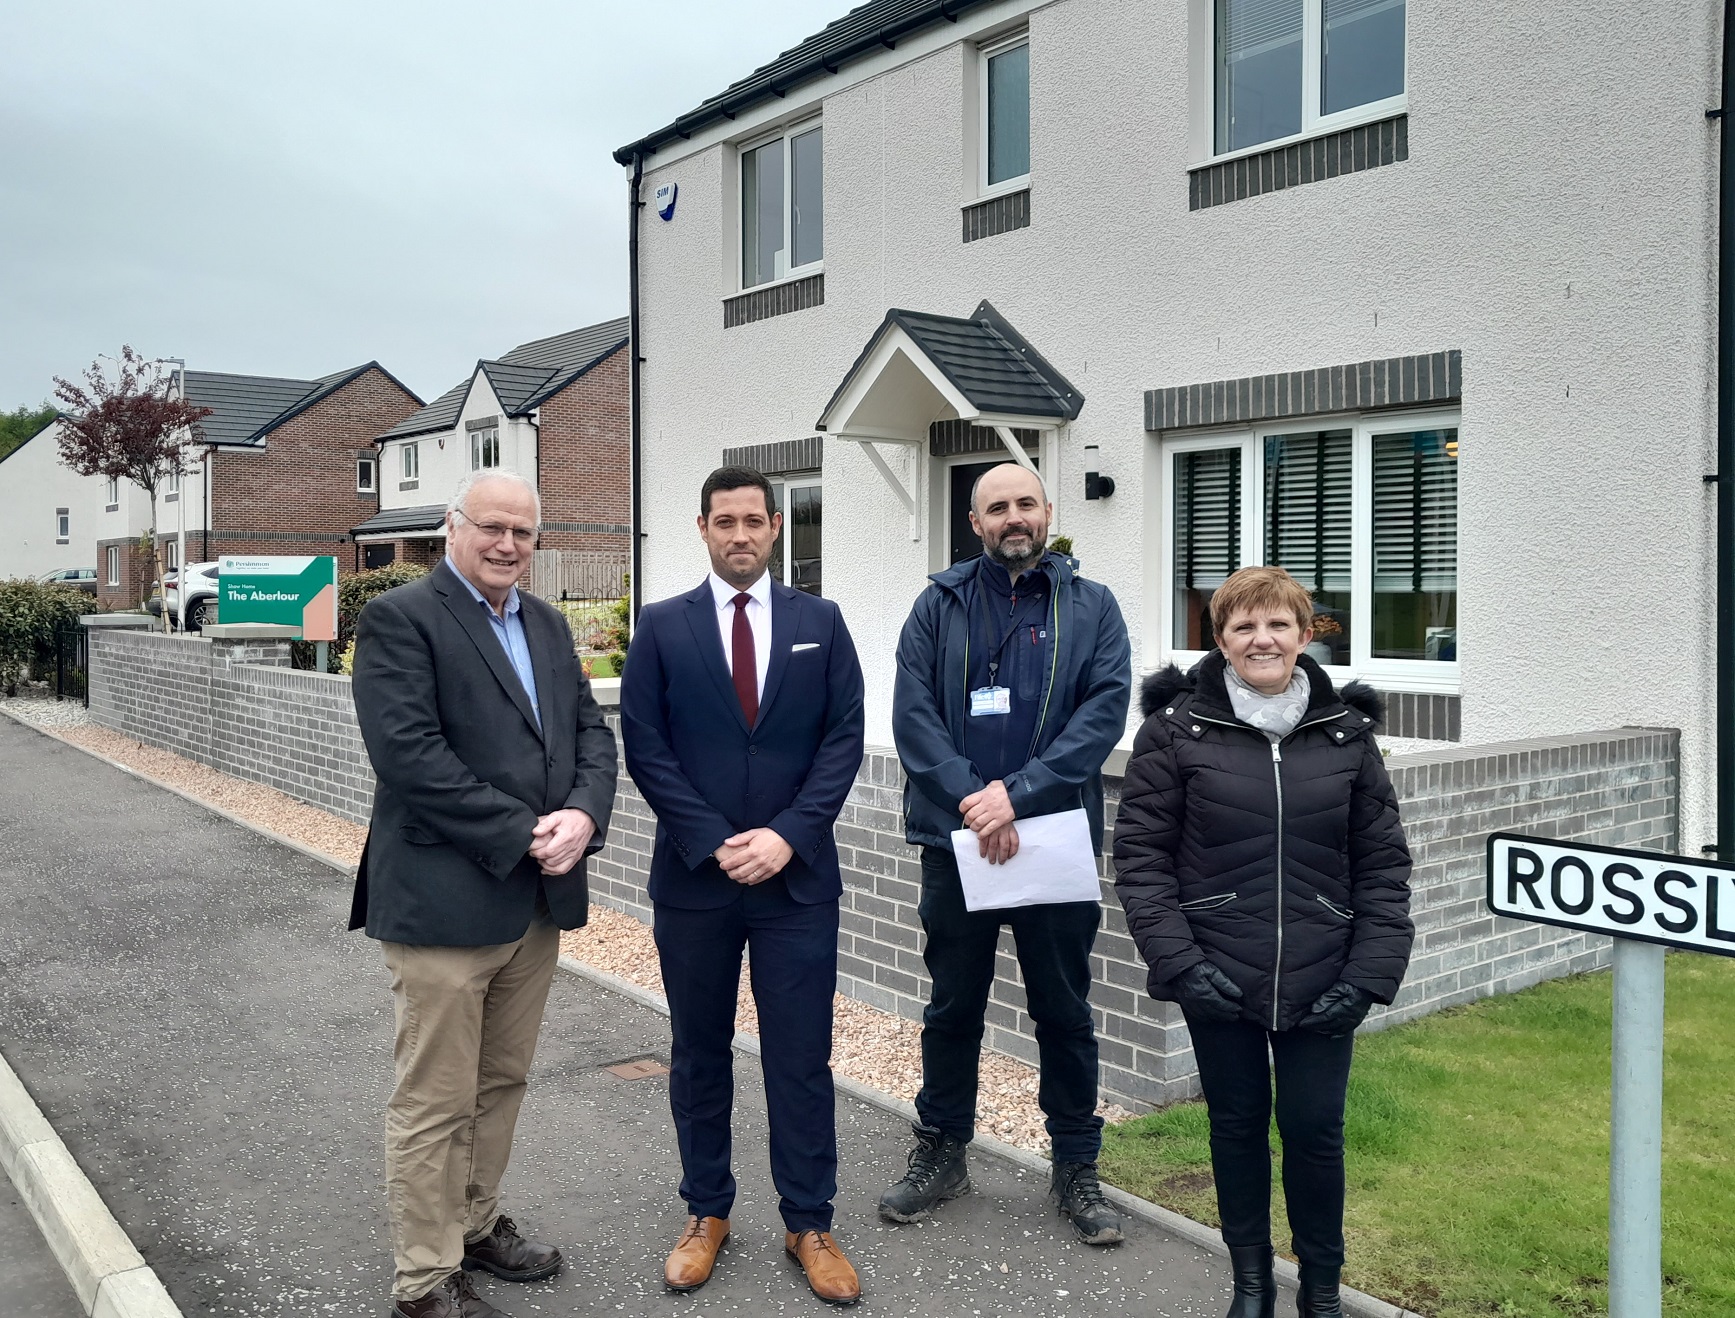 Council leadership team visits Persimmon Homes site in Kirkcaldy